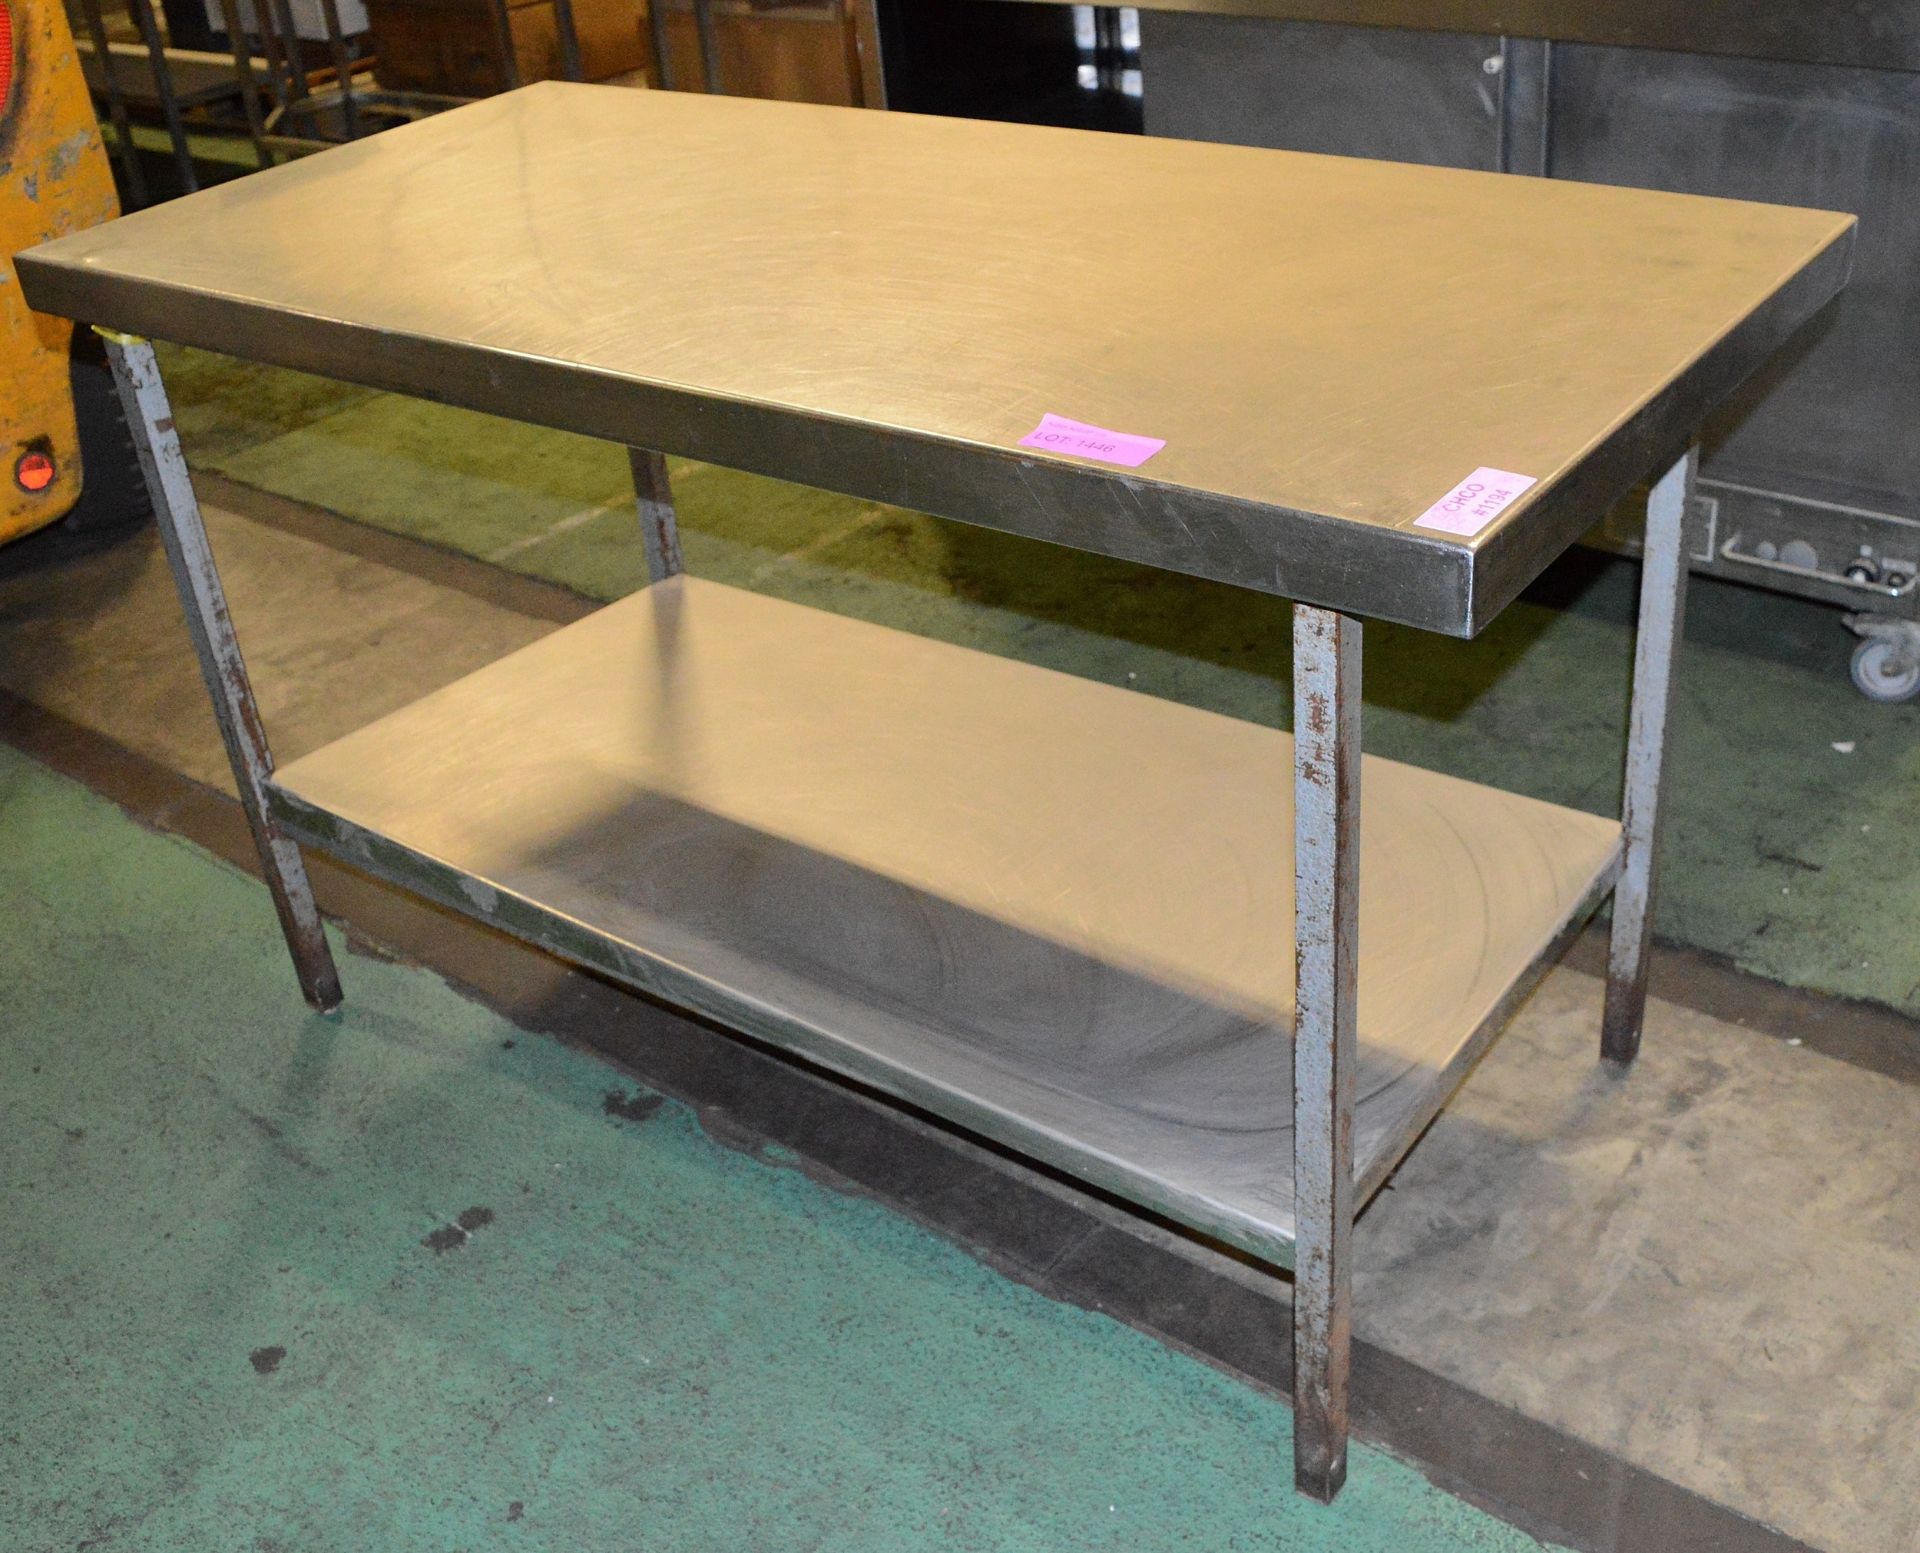 Stainless table with shelf - 1500 x 700 x 870